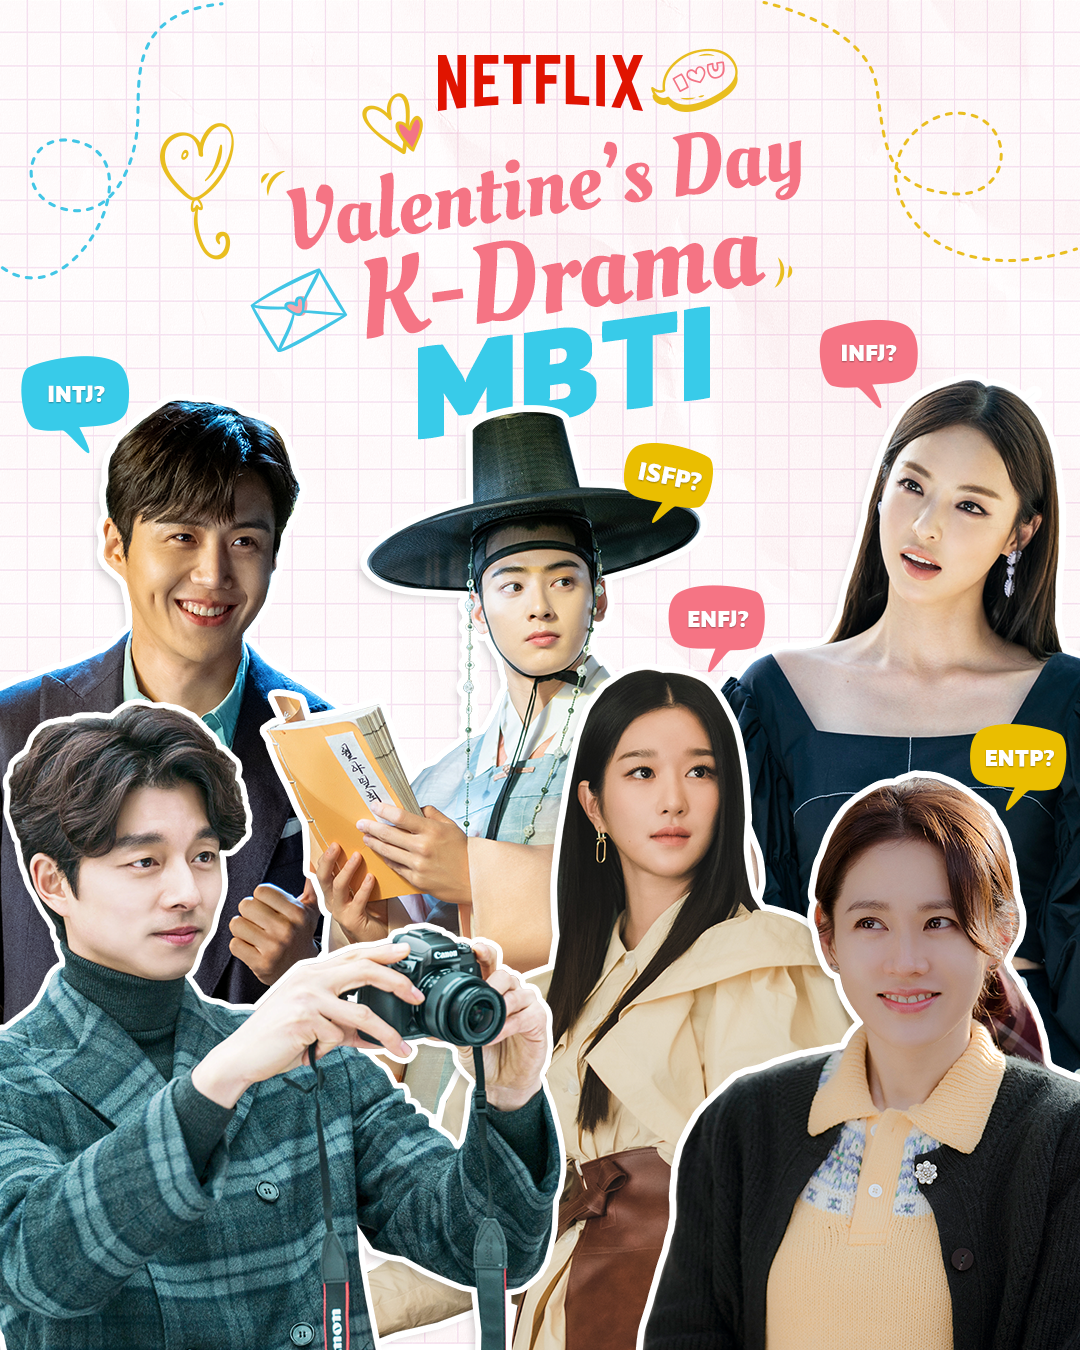 Who's Your K-Drama Love Match and Soulmates Based On Your MBTI